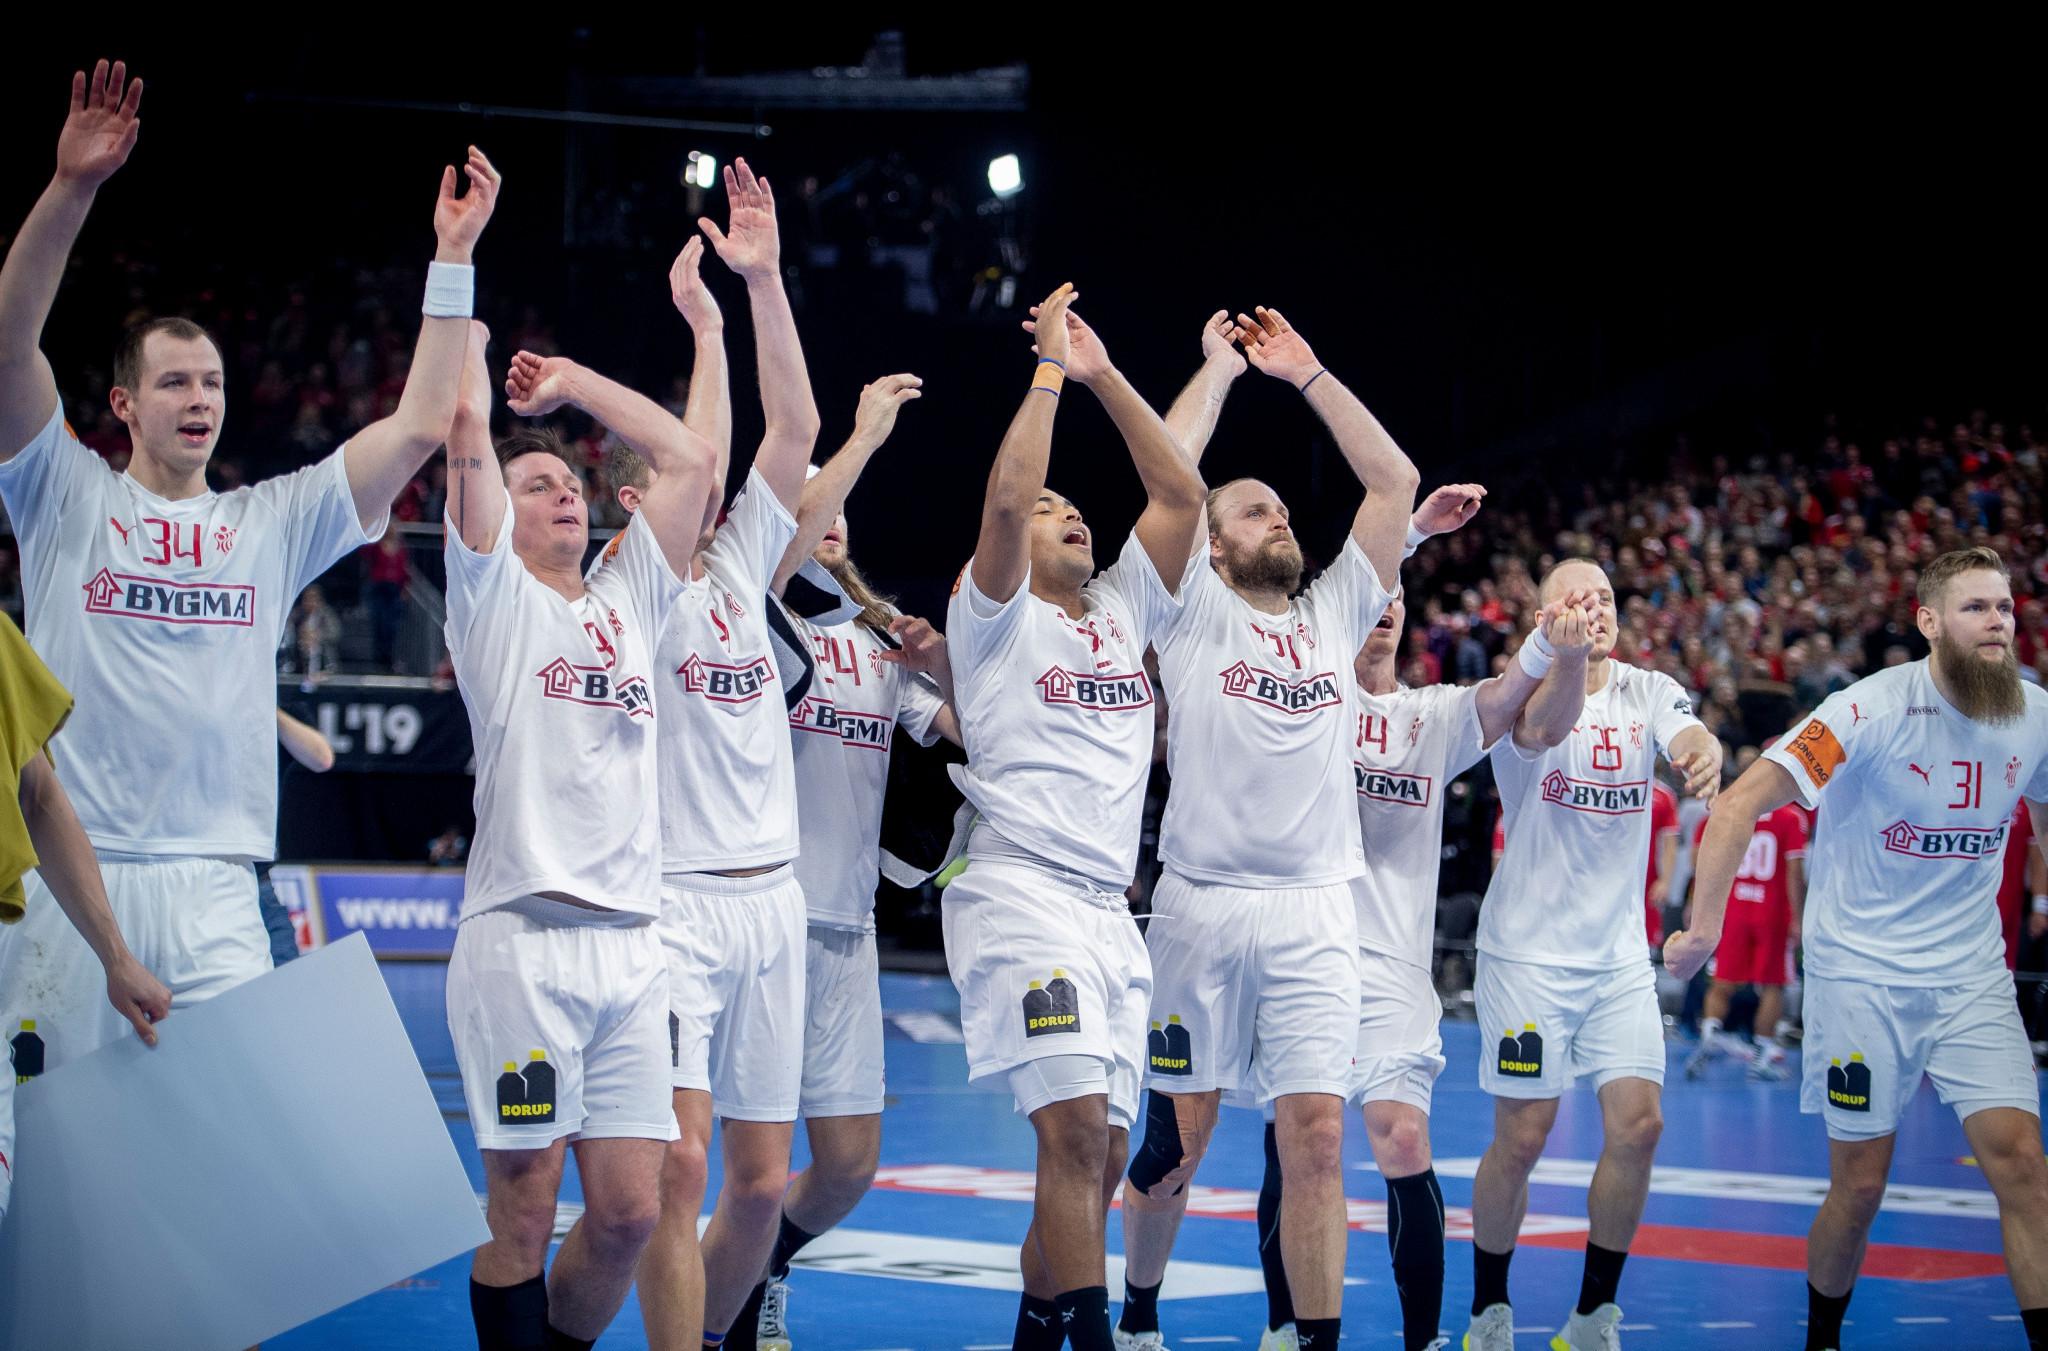 Denmark celebrate after beating Chile in their first game of the IHF Men's Handball World Championship ©Getty Images